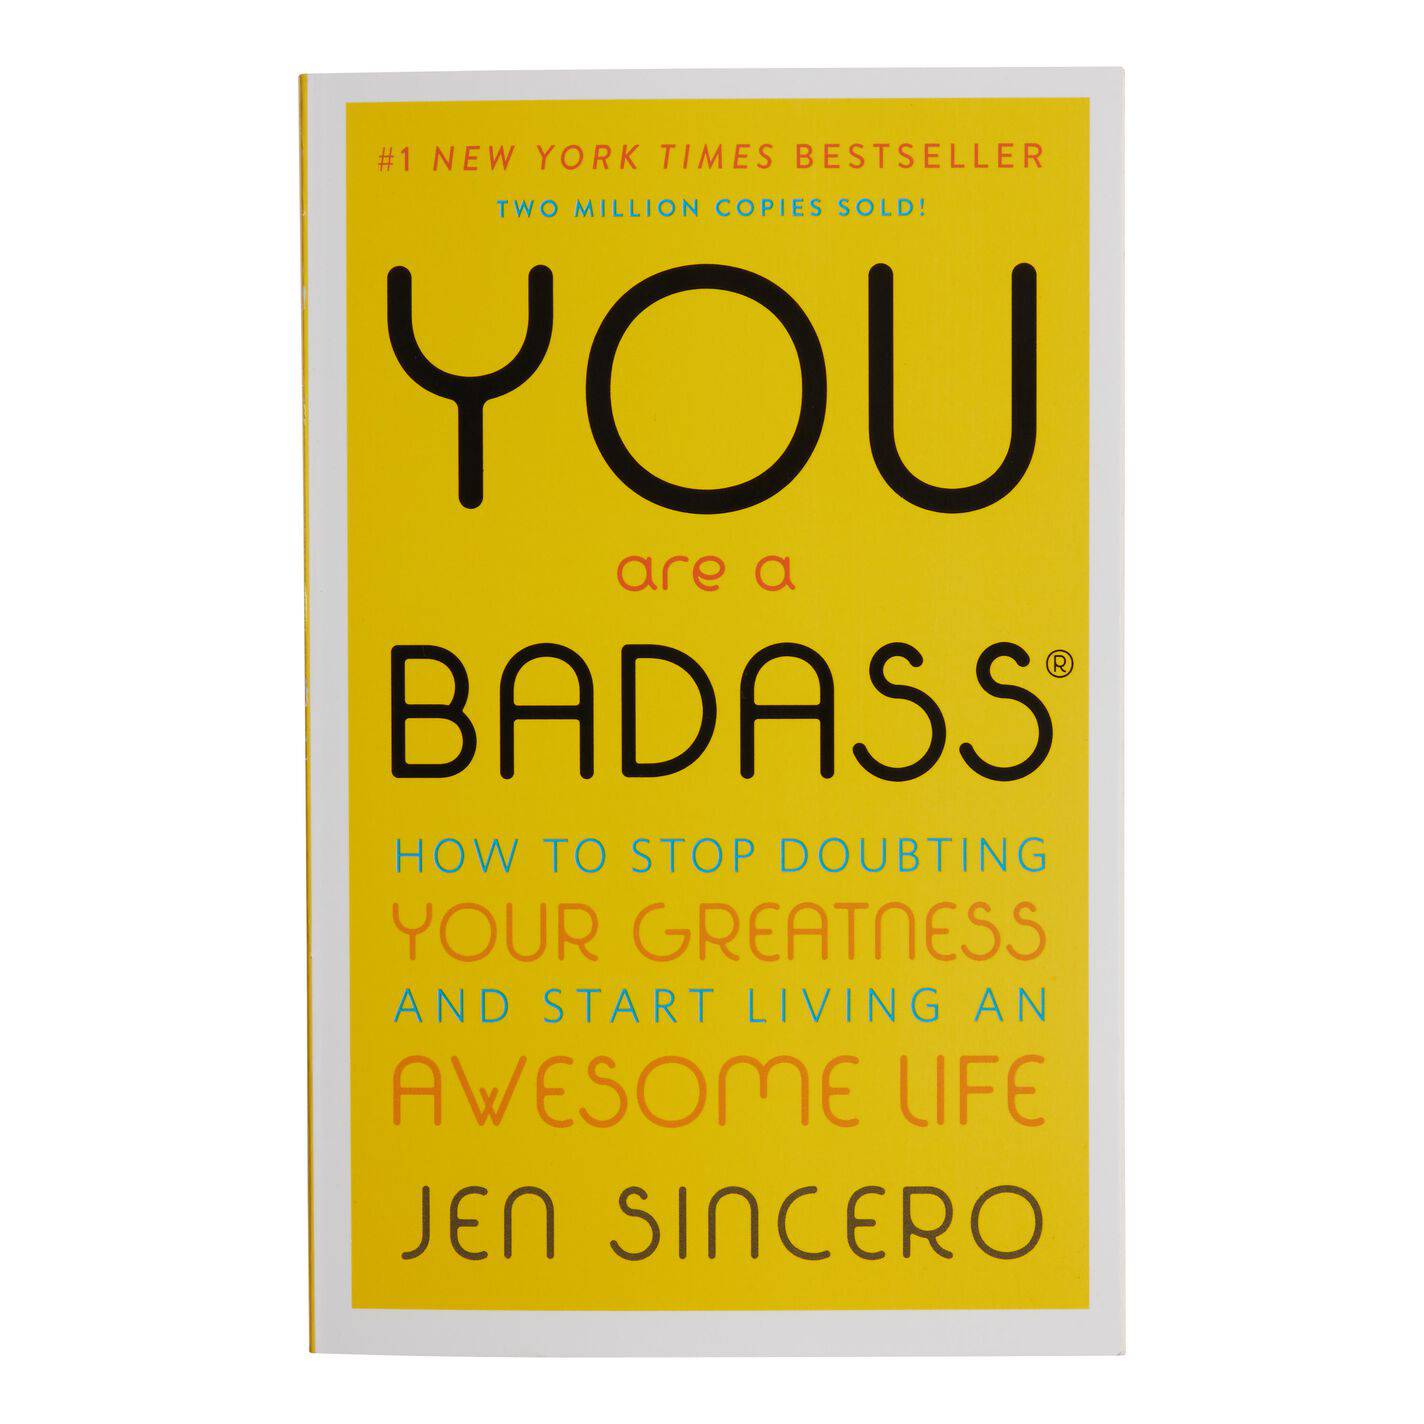 You Are A Badass Book - Findlay Rowe Designs